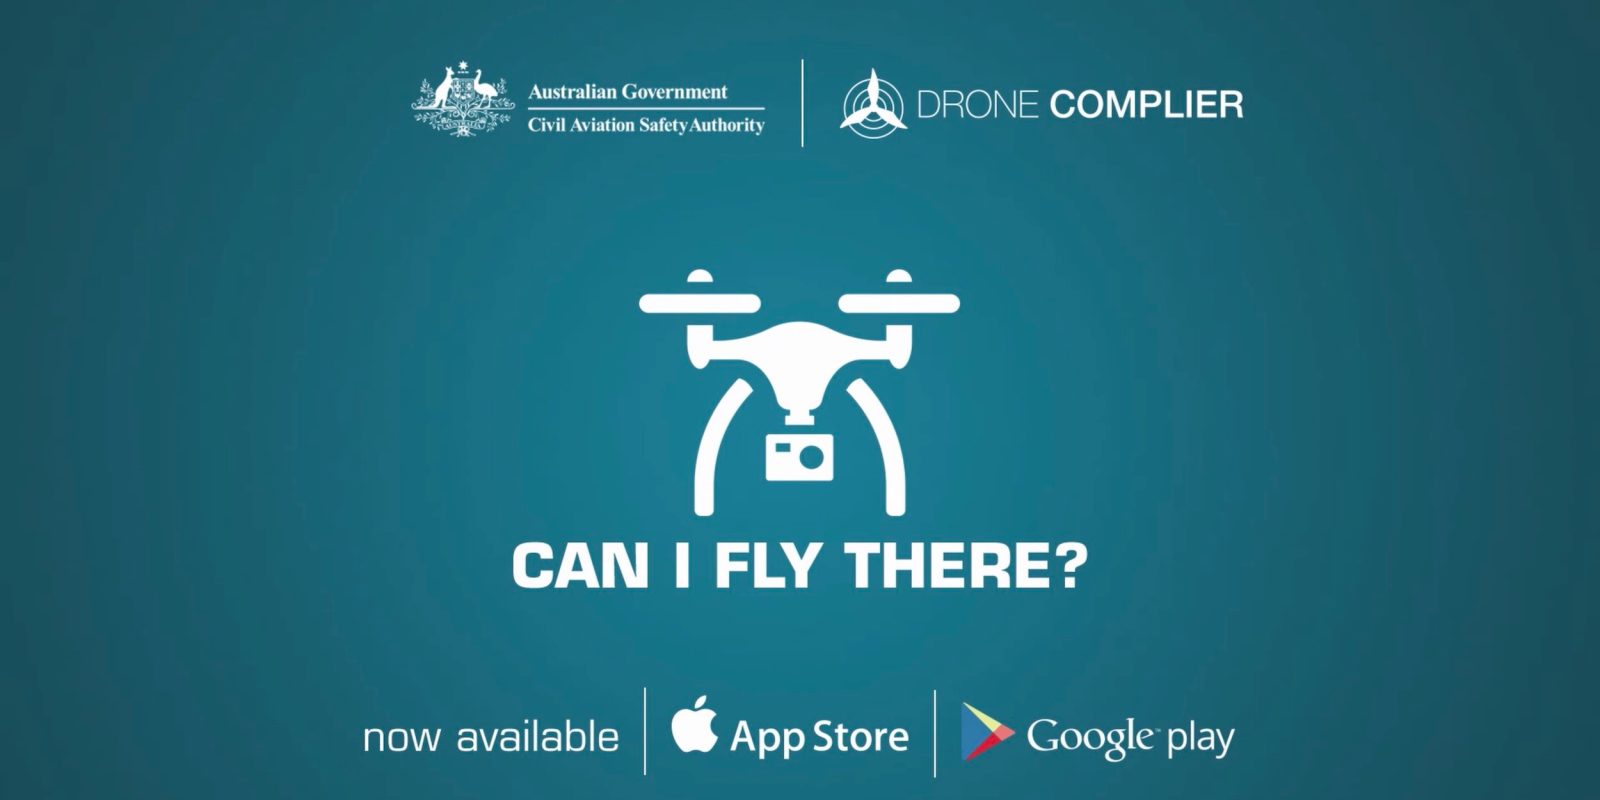 Australian CASA launches new drone safety website